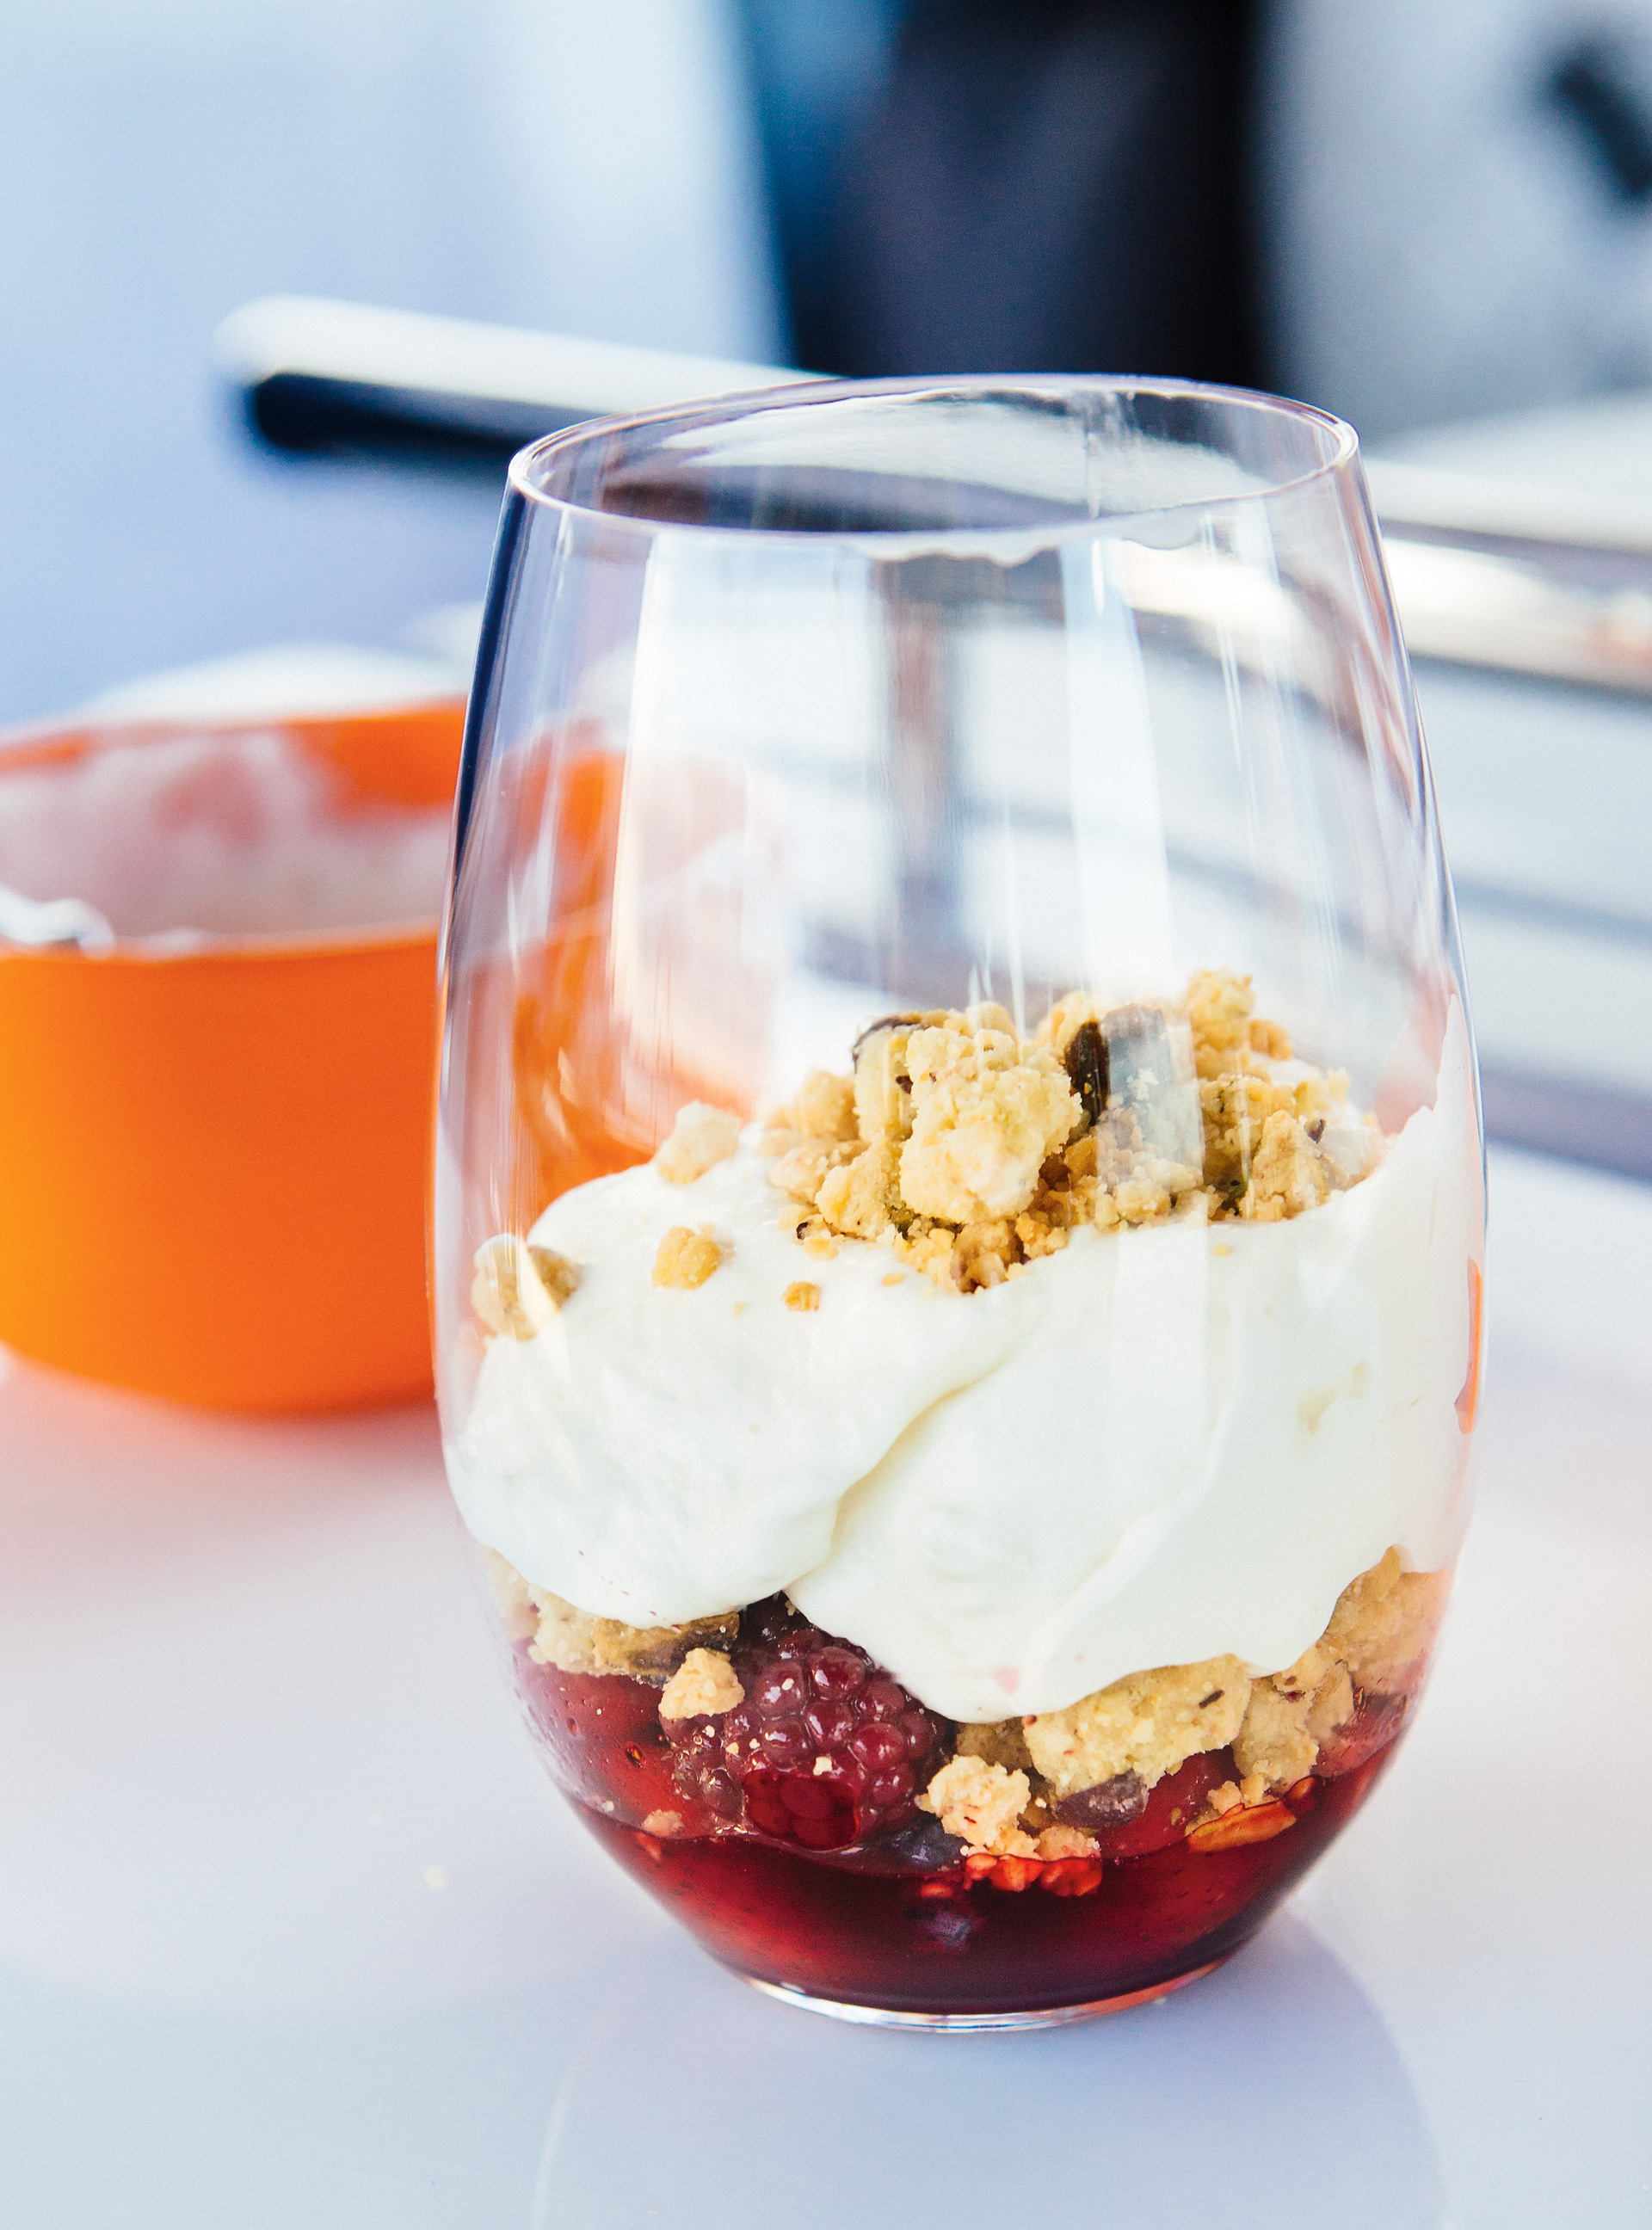 Berry and Pistachio Crumble with Whipped Cream